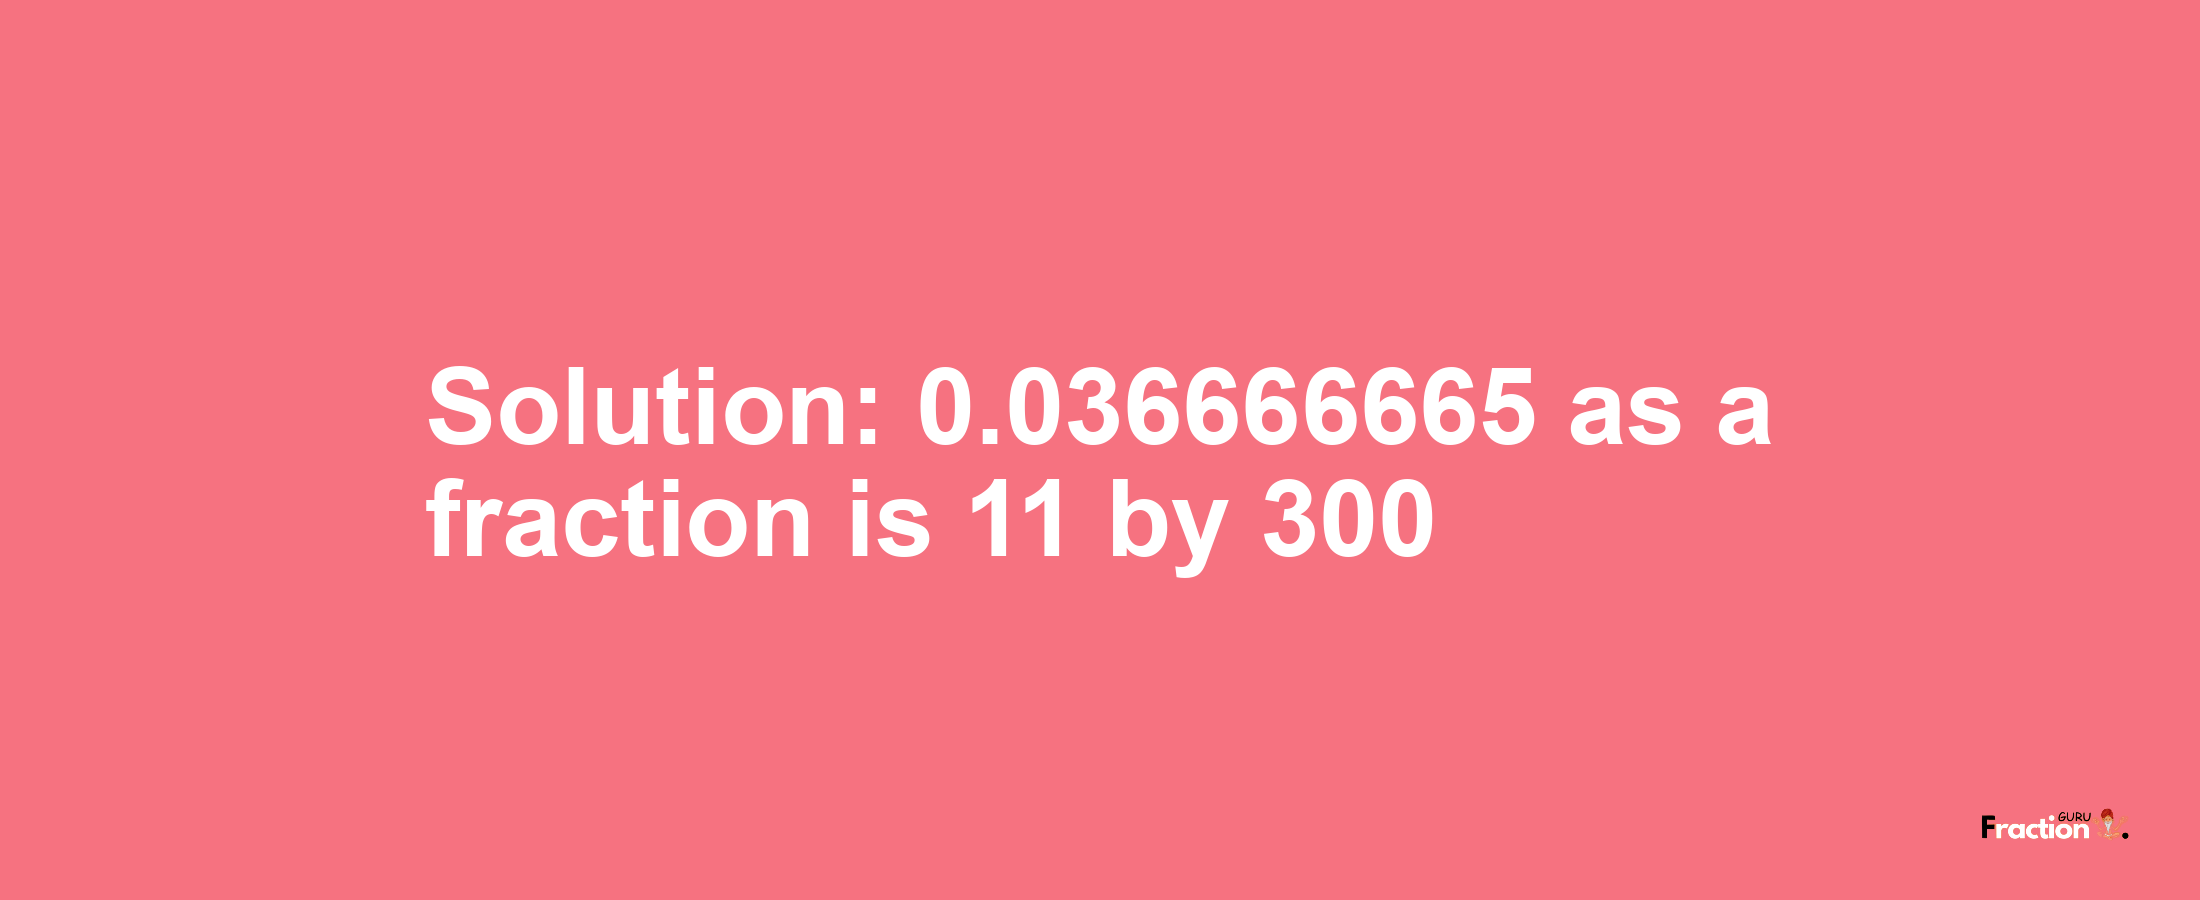 Solution:0.036666665 as a fraction is 11/300